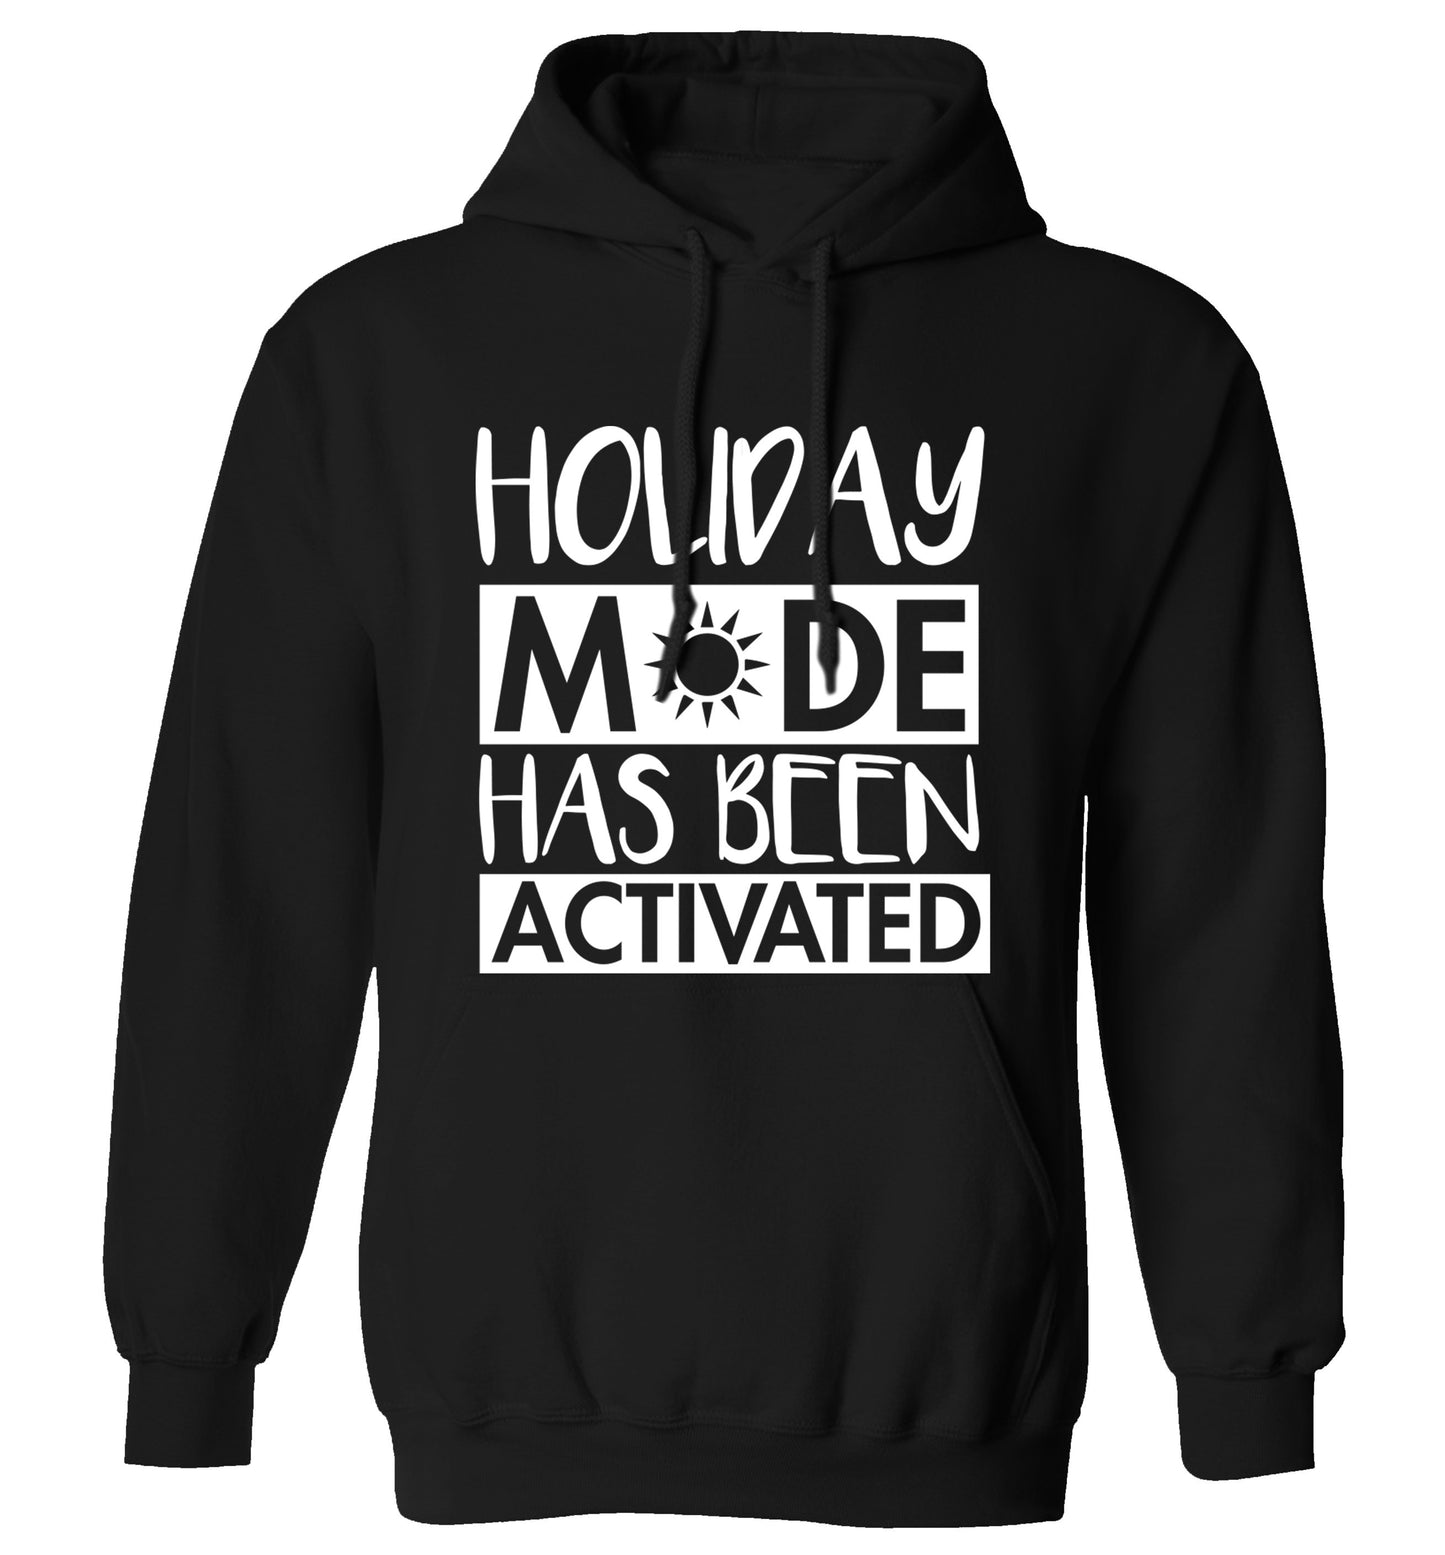 Holiday mode has been activated adults unisex black hoodie 2XL